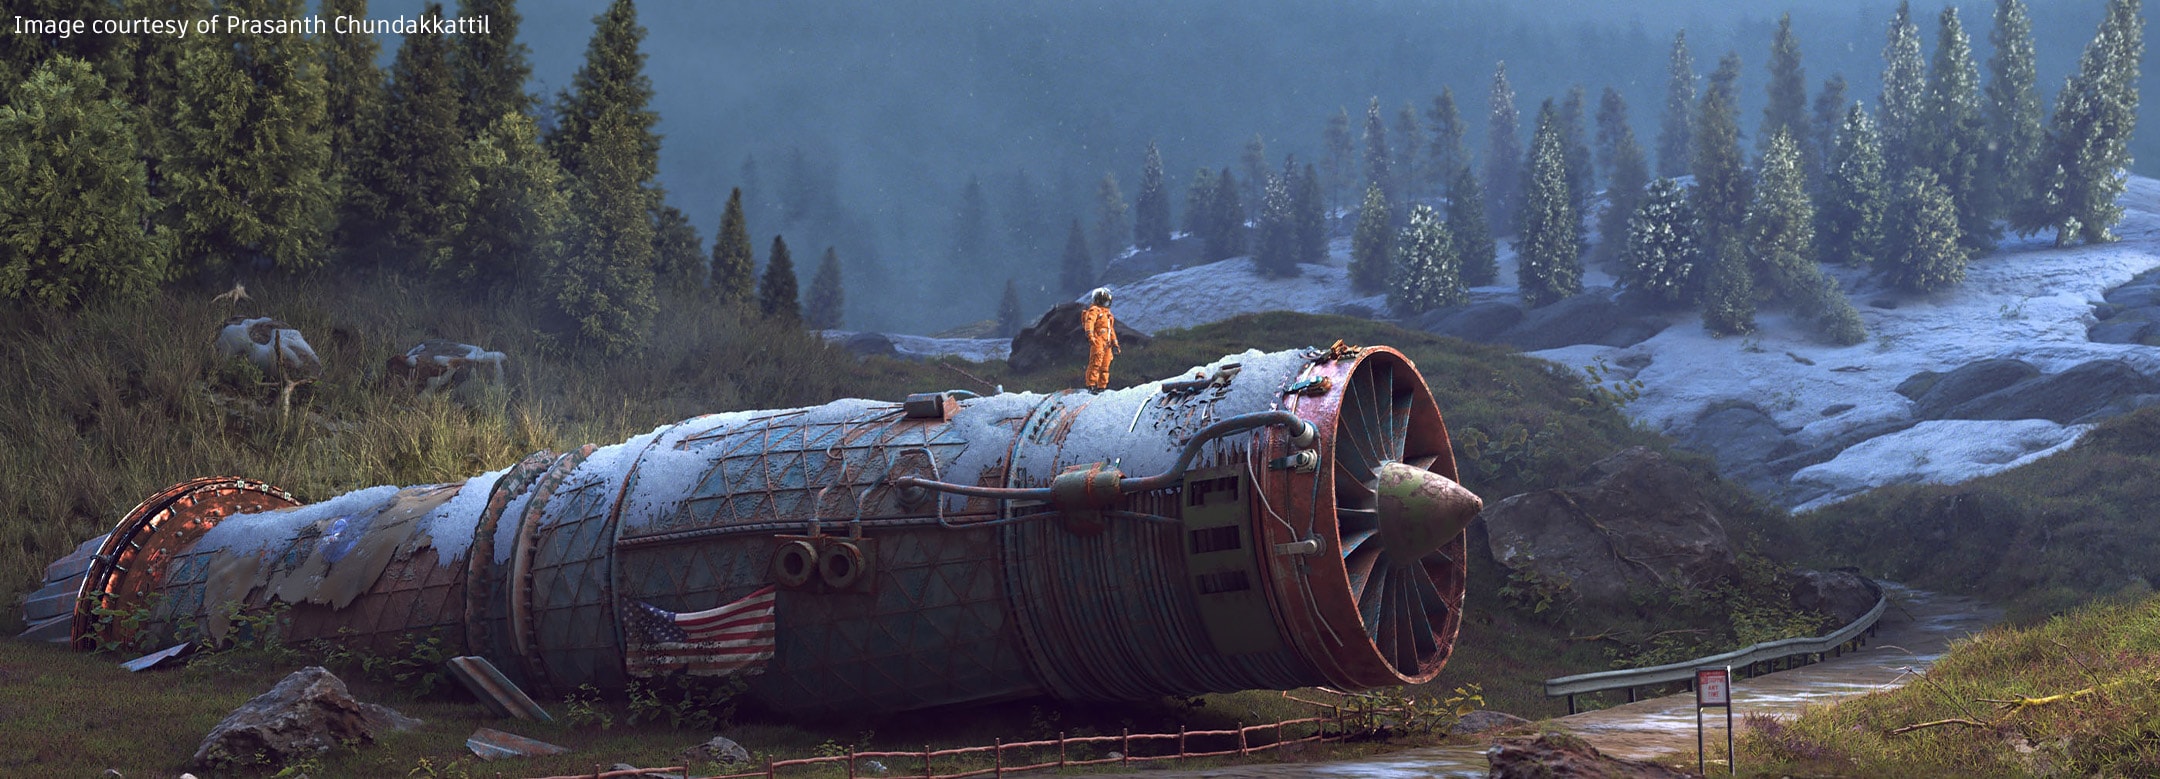 Scene created in Maya showing an astronaut standing on a crashed space shuttle in a snowy forest landscape